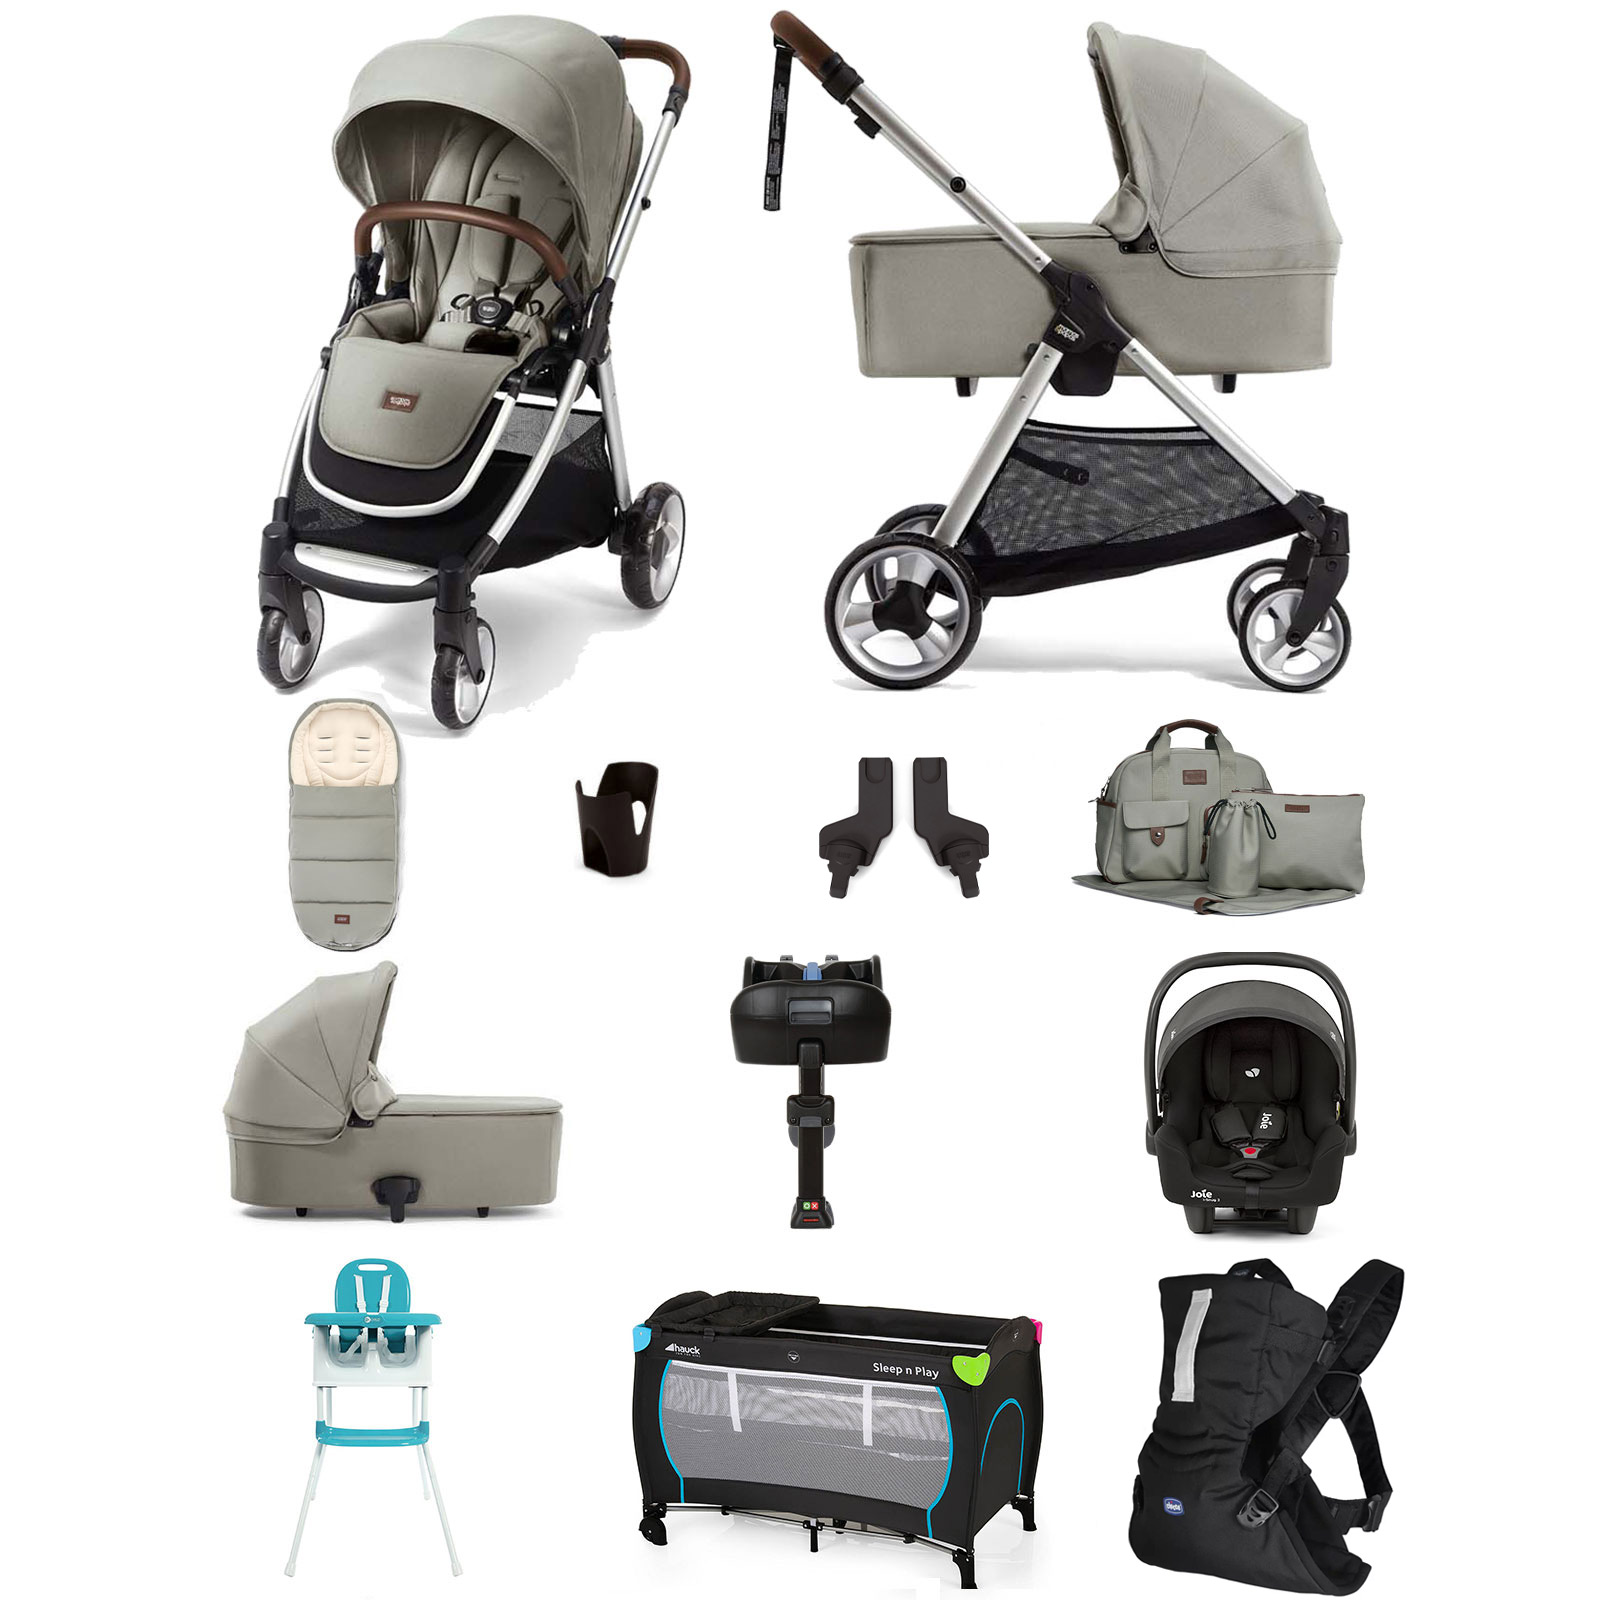 Mamas & Papas Flip XT2 12pc Essentials (Gemm Car Seat) Everything You Need Travel System Bundle with Carrycot & ISOFIX Base - Sage Green